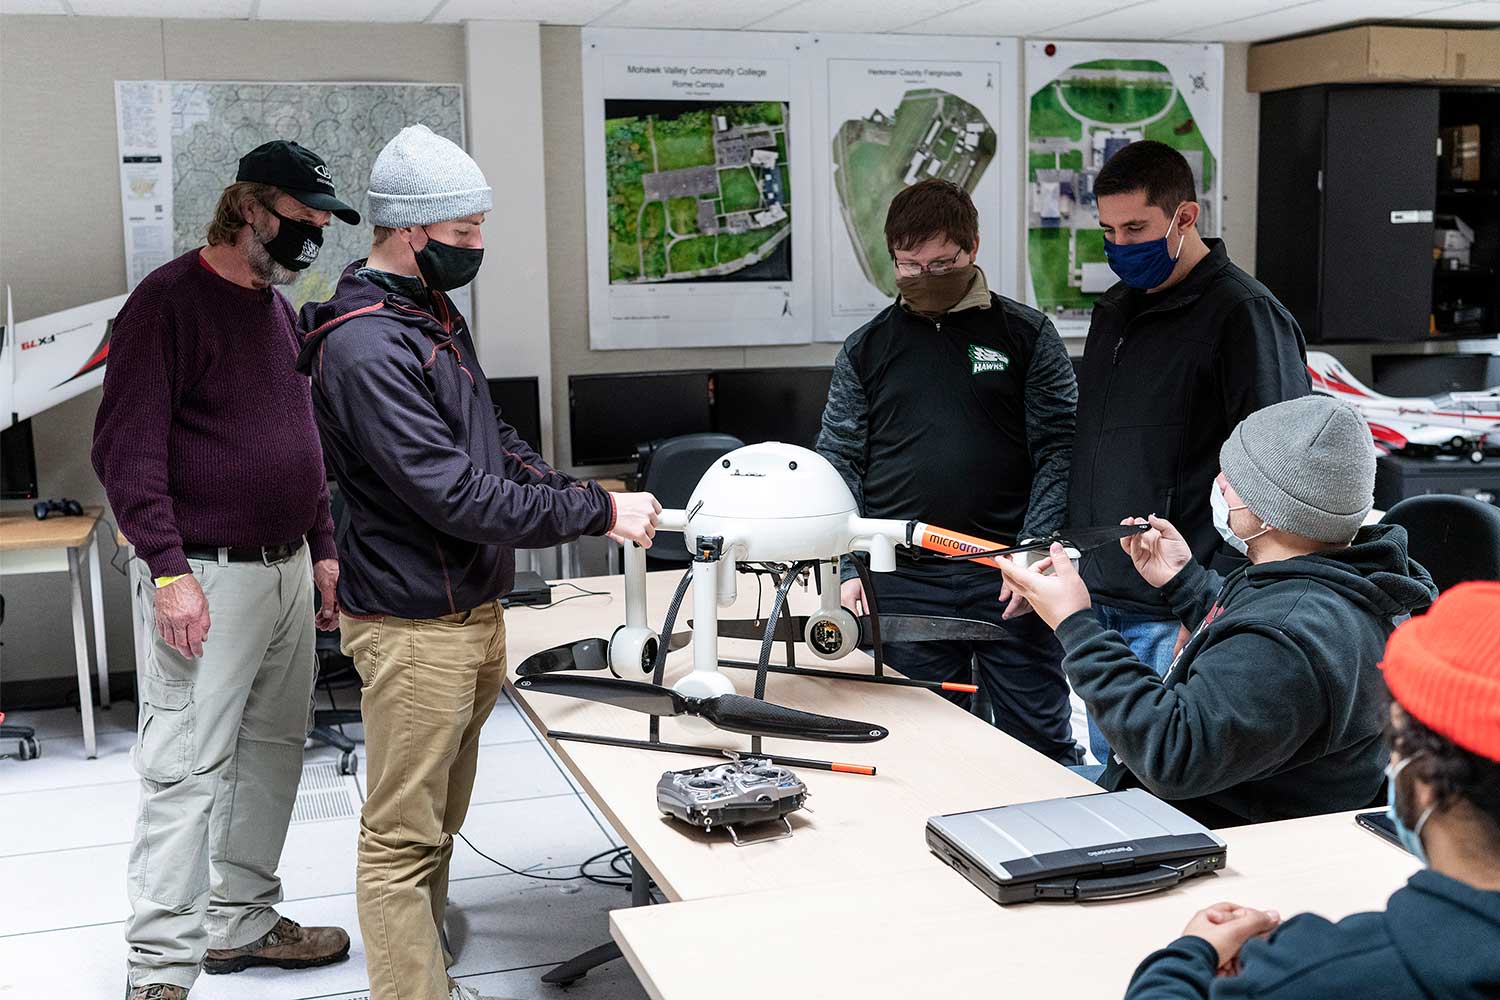 MVCC Professor Bill Judycki and students in the Piloted Aircraft Systems Program Classroom